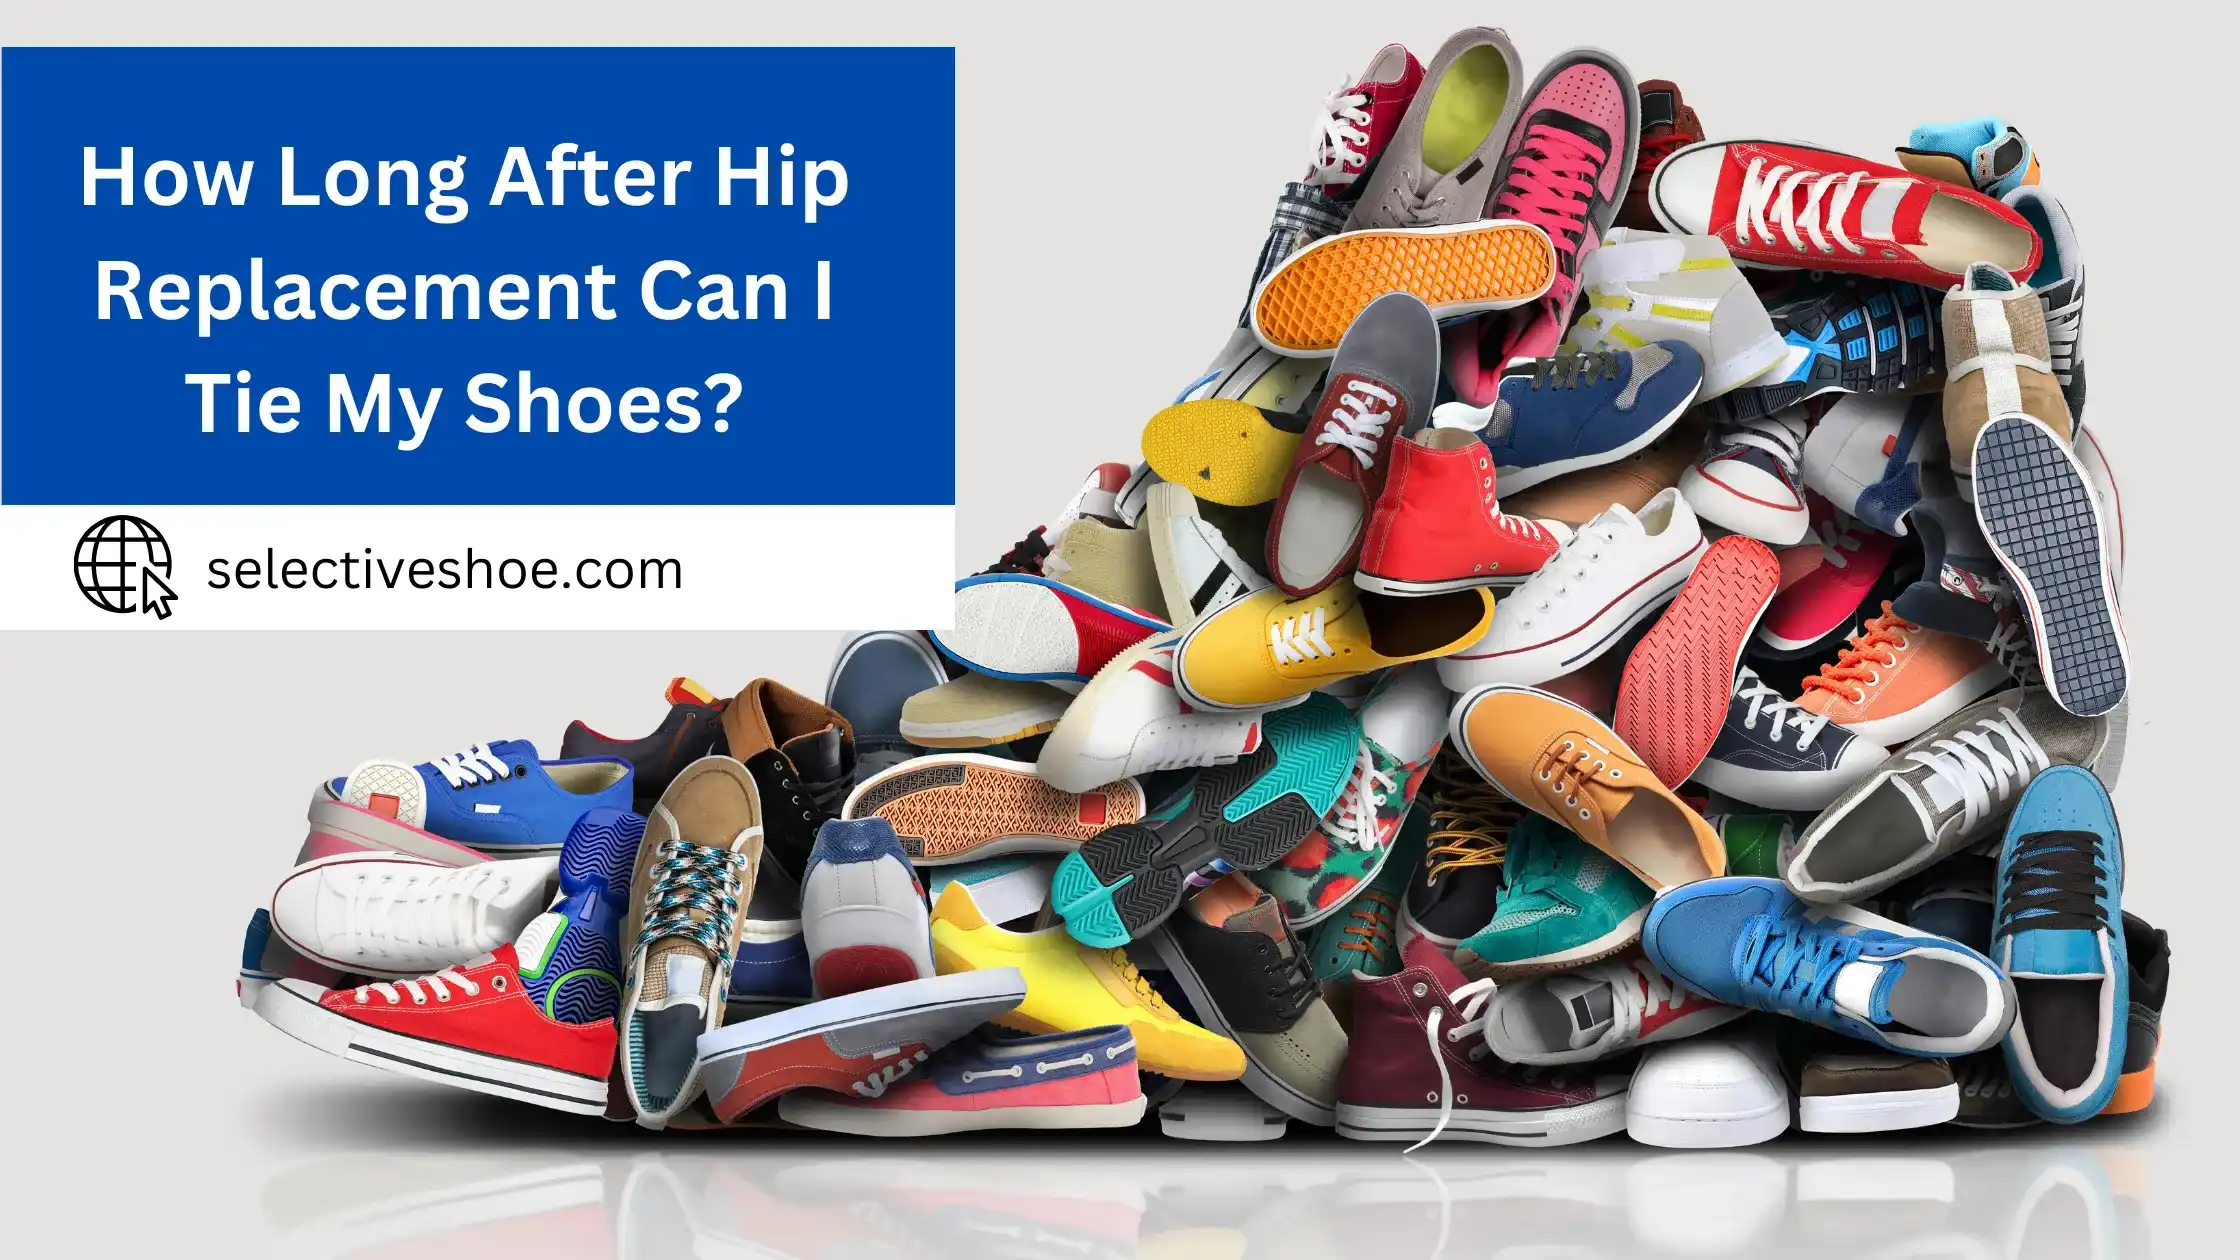 How Long After Hip Replacement Can I Tie My Shoes? Pro Tips